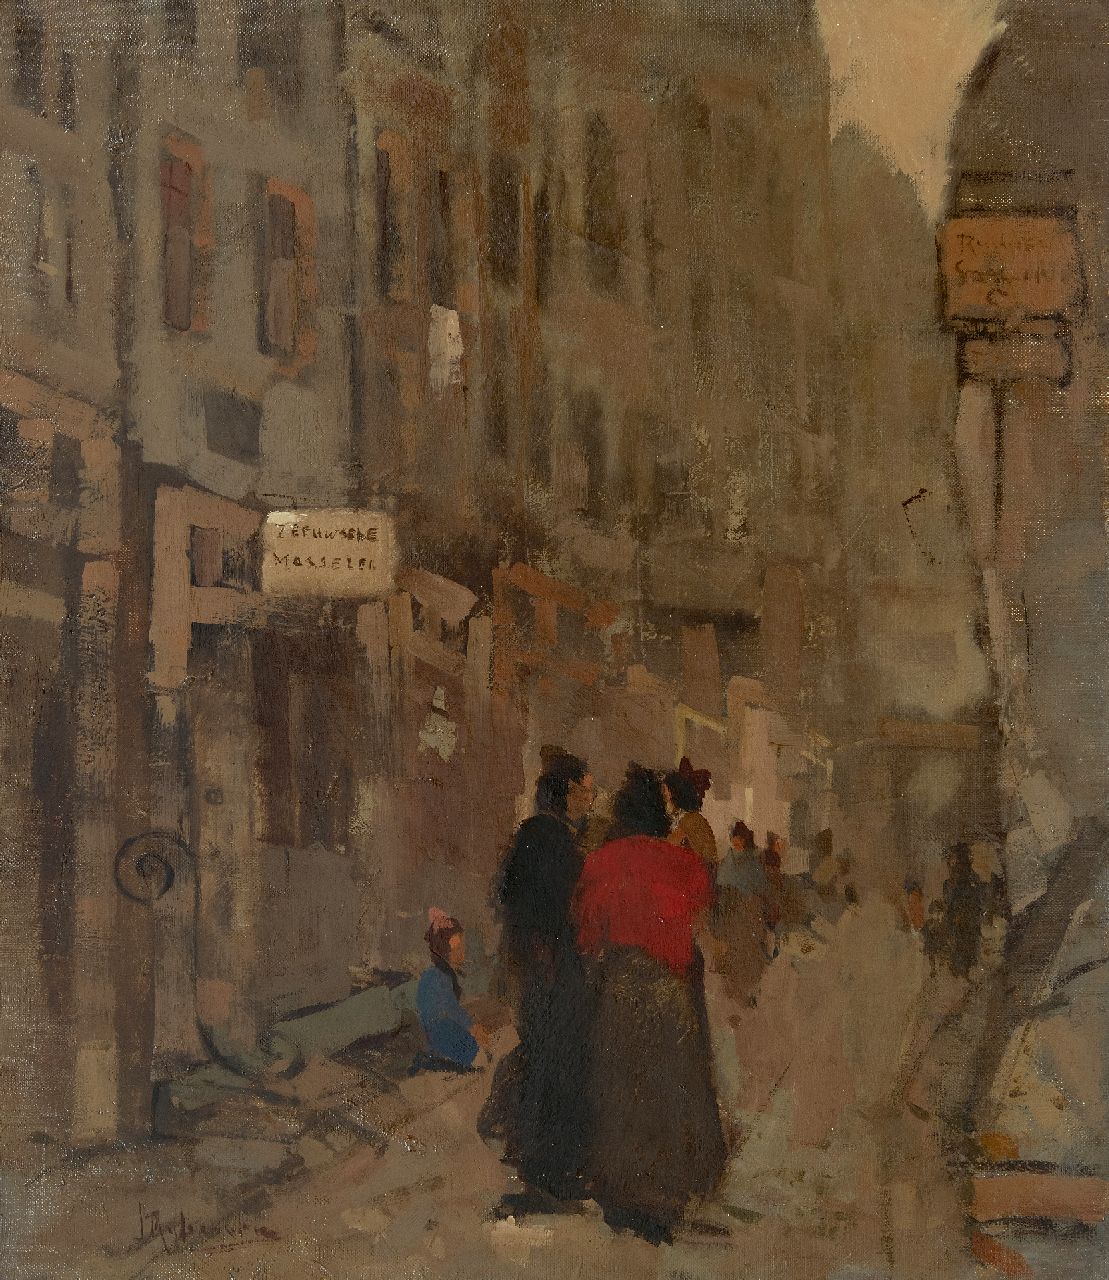 Rijlaarsdam J.  | Jan Rijlaarsdam | Paintings offered for sale | Street with figures, oil on canvas 60.3 x 51.4 cm, signed l.l.